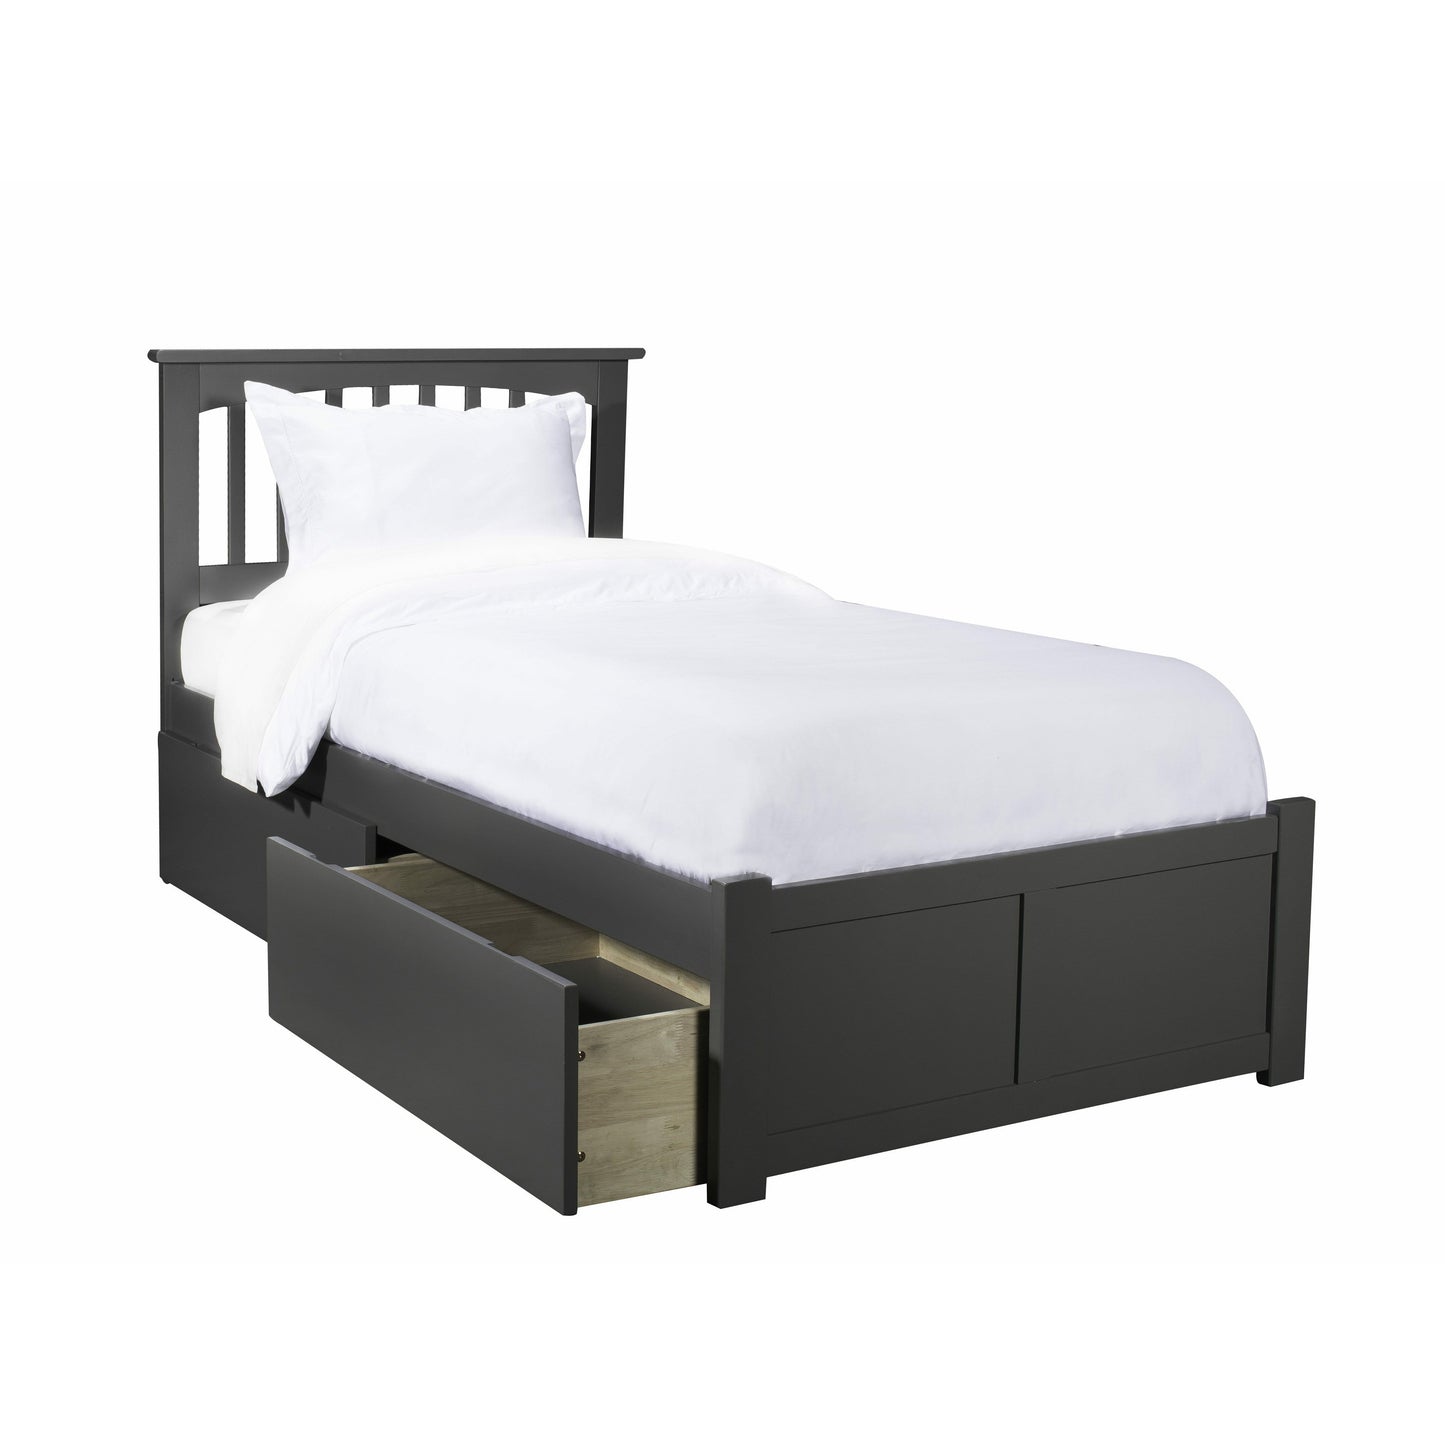 Atlantic Furniture Bed grey Mission Twin XL Platform Bed with Flat Panel Foot Board and 2 Urban Bed Drawers in Espresso.